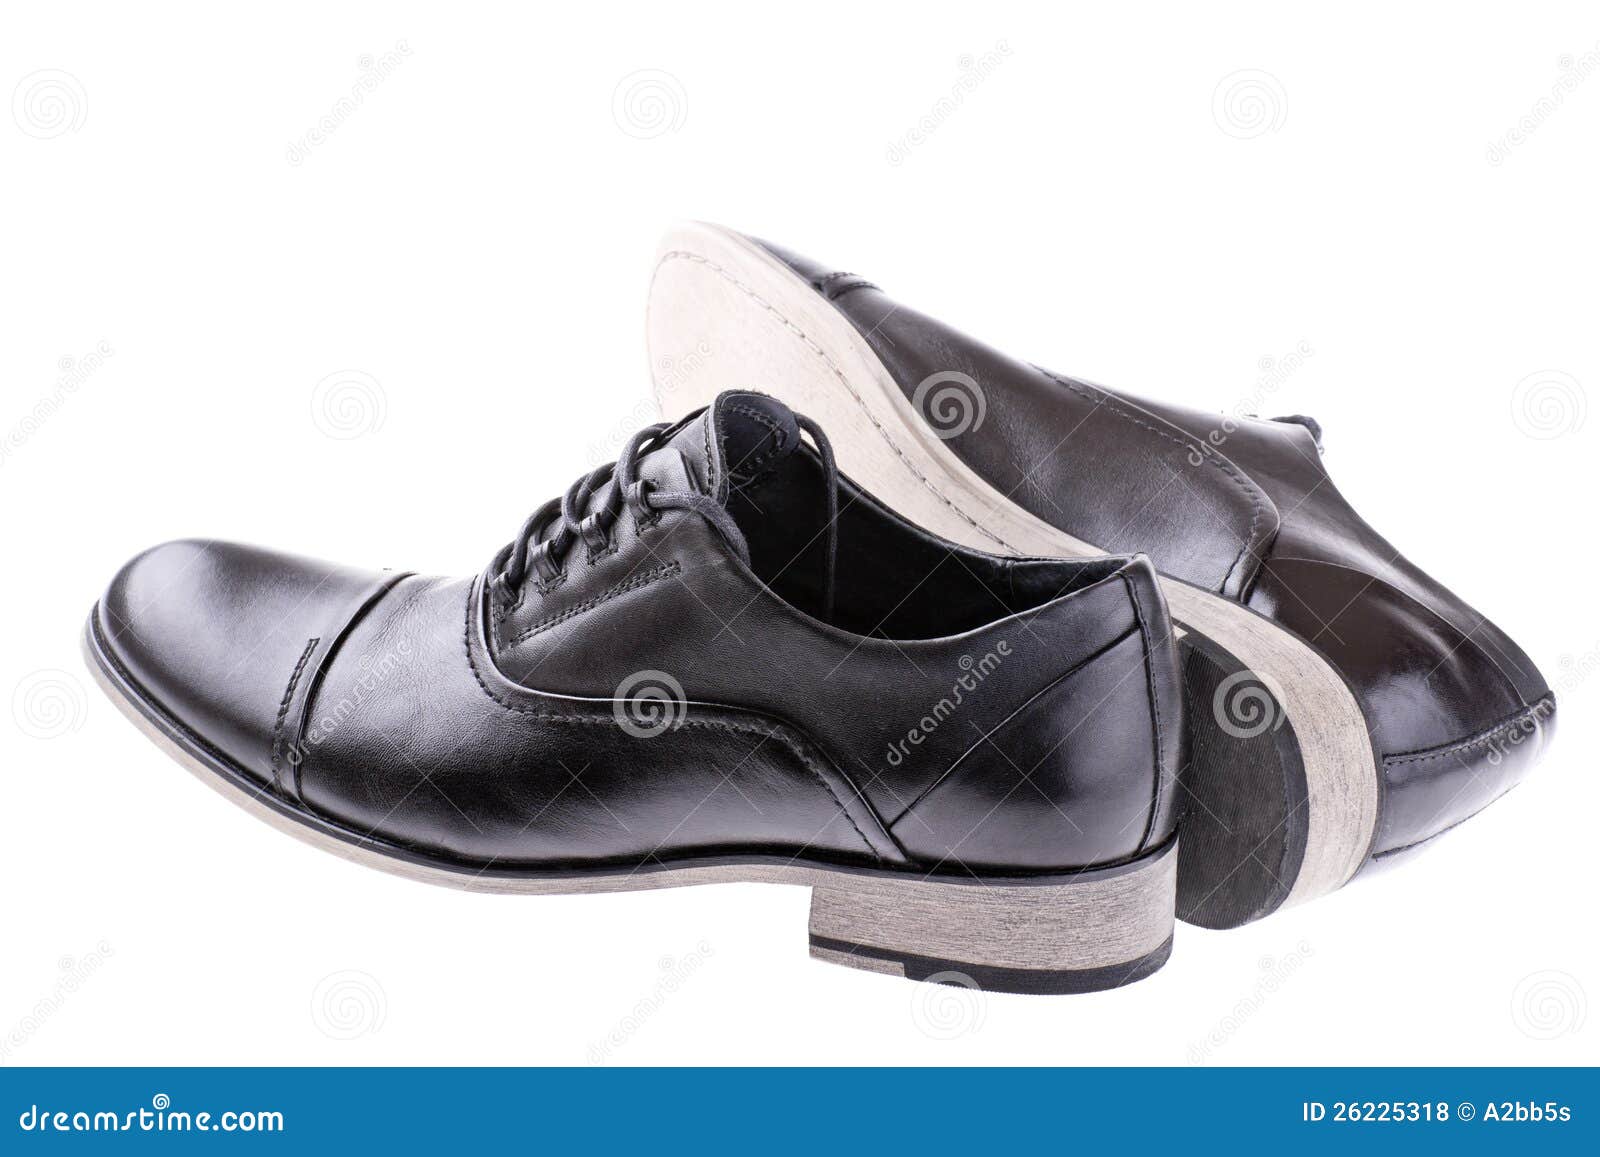 A pair of men s shoes stock photo. Image of footgear - 26225318